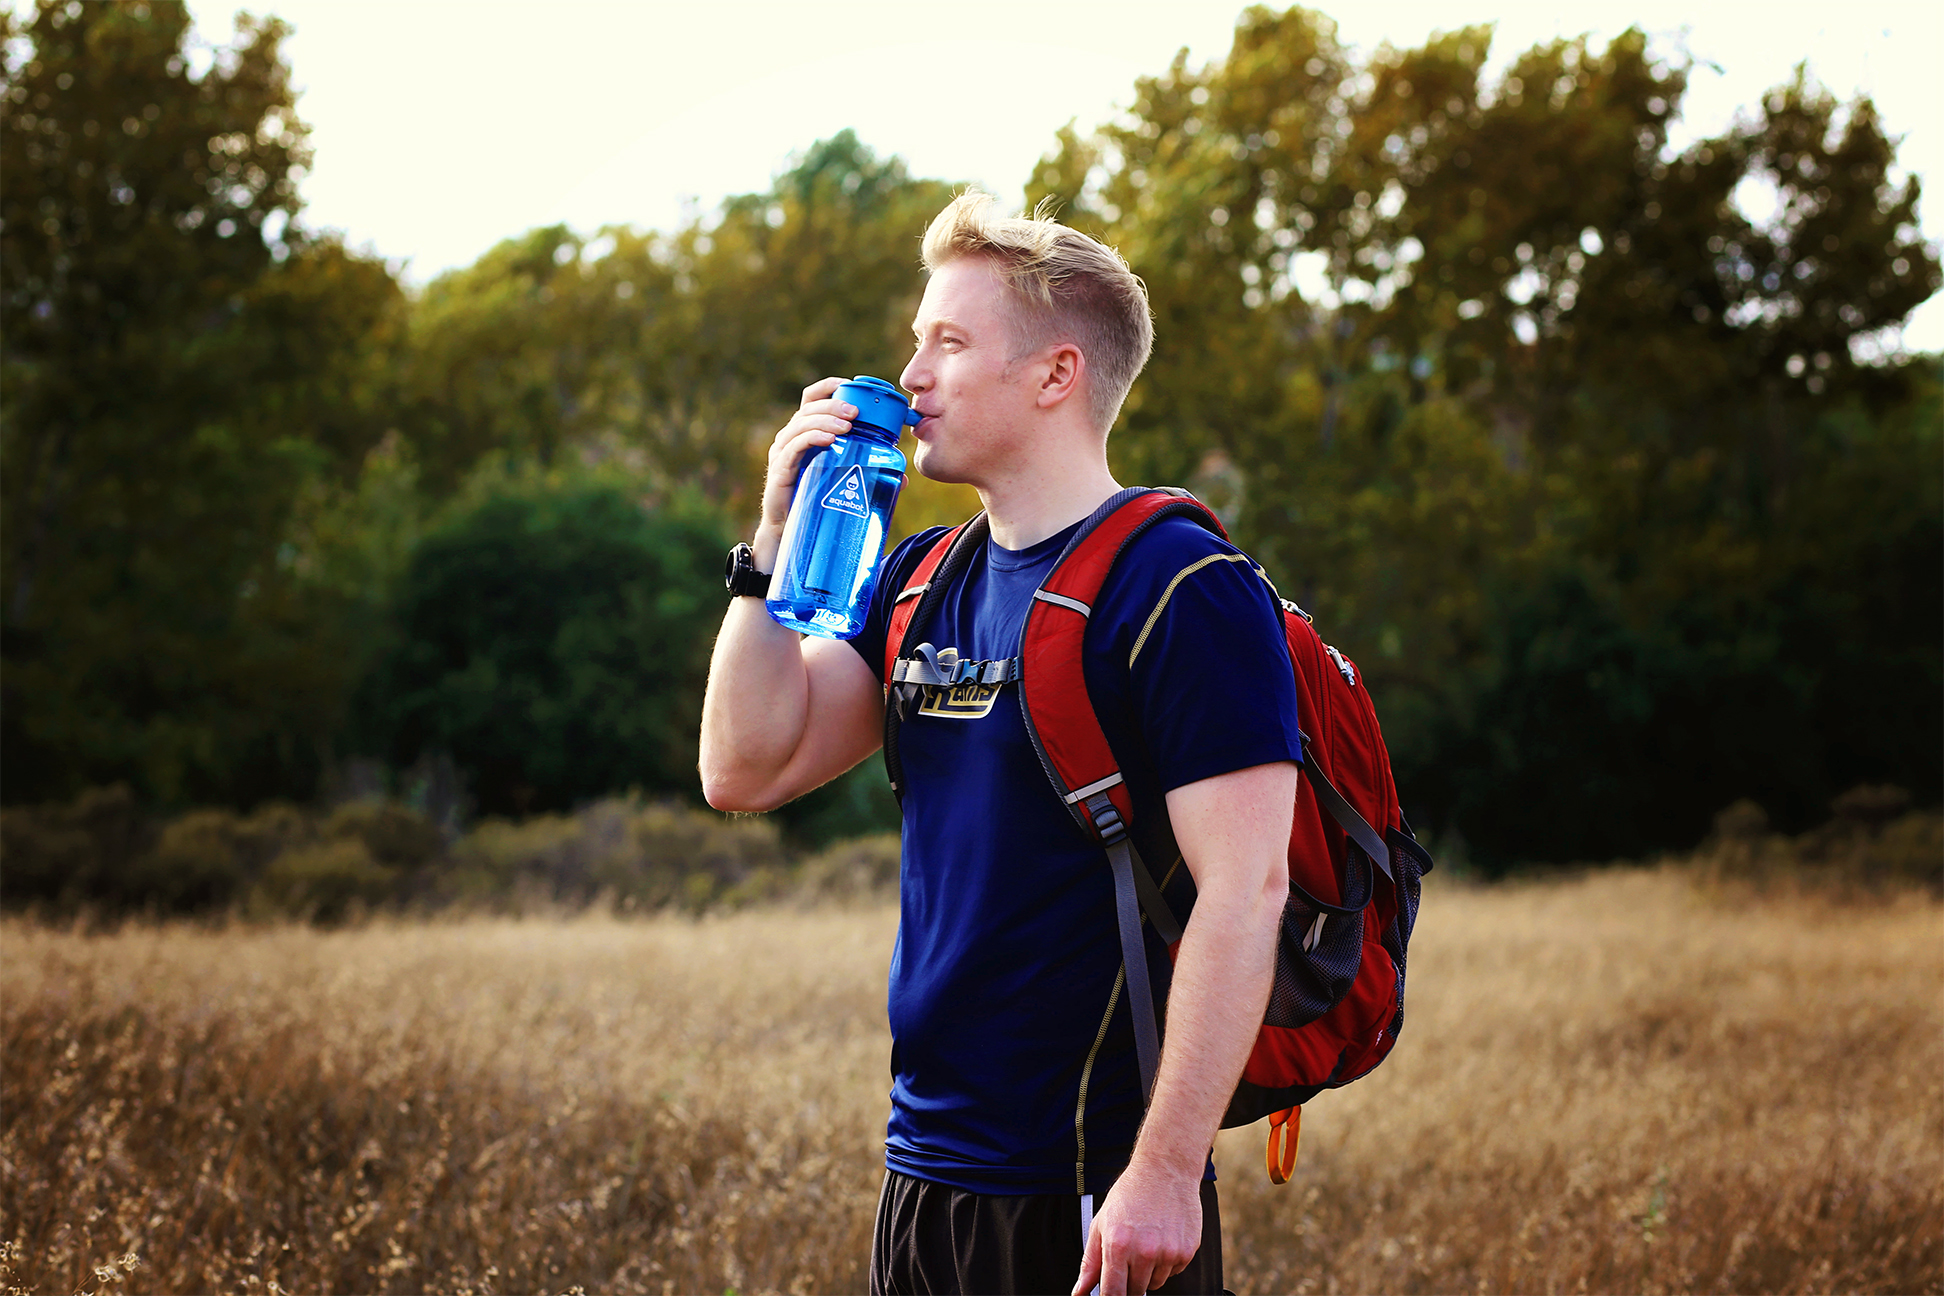 Lunatec Hydration Spray Water Bottle Is A Pressurized Personal Mister, Camp Shower and Water Bottle in One Easy to Use BPA Free Bottle.